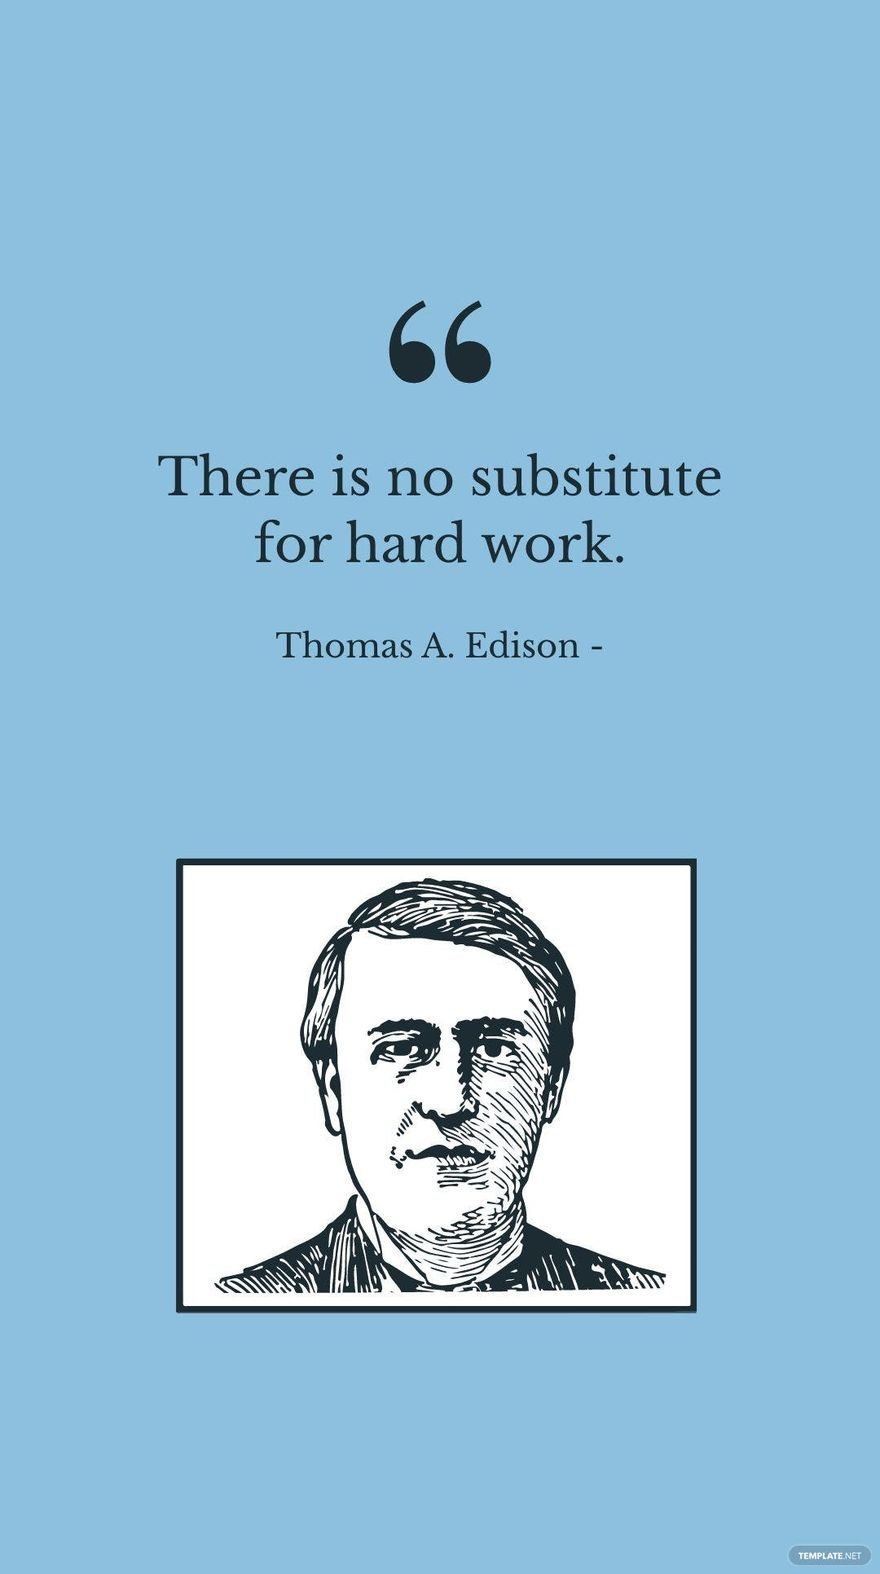 Thomas A. Edison - There is no substitute for hard work.